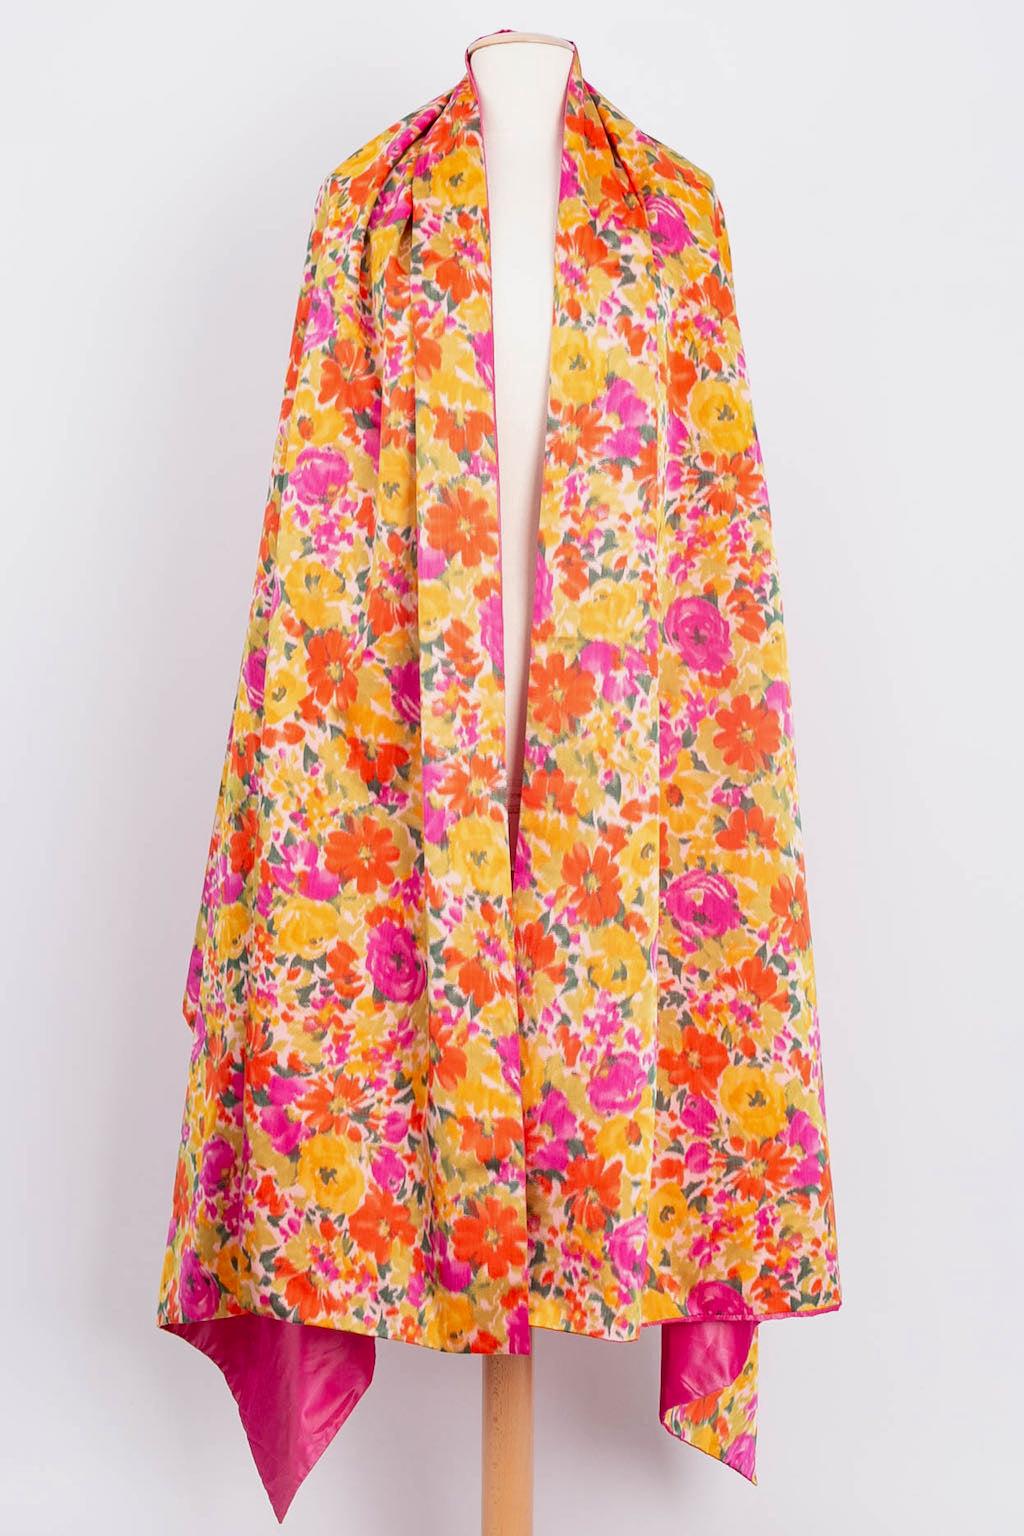 Nina Ricci Flower Silk Dress and its Stole For Sale 11